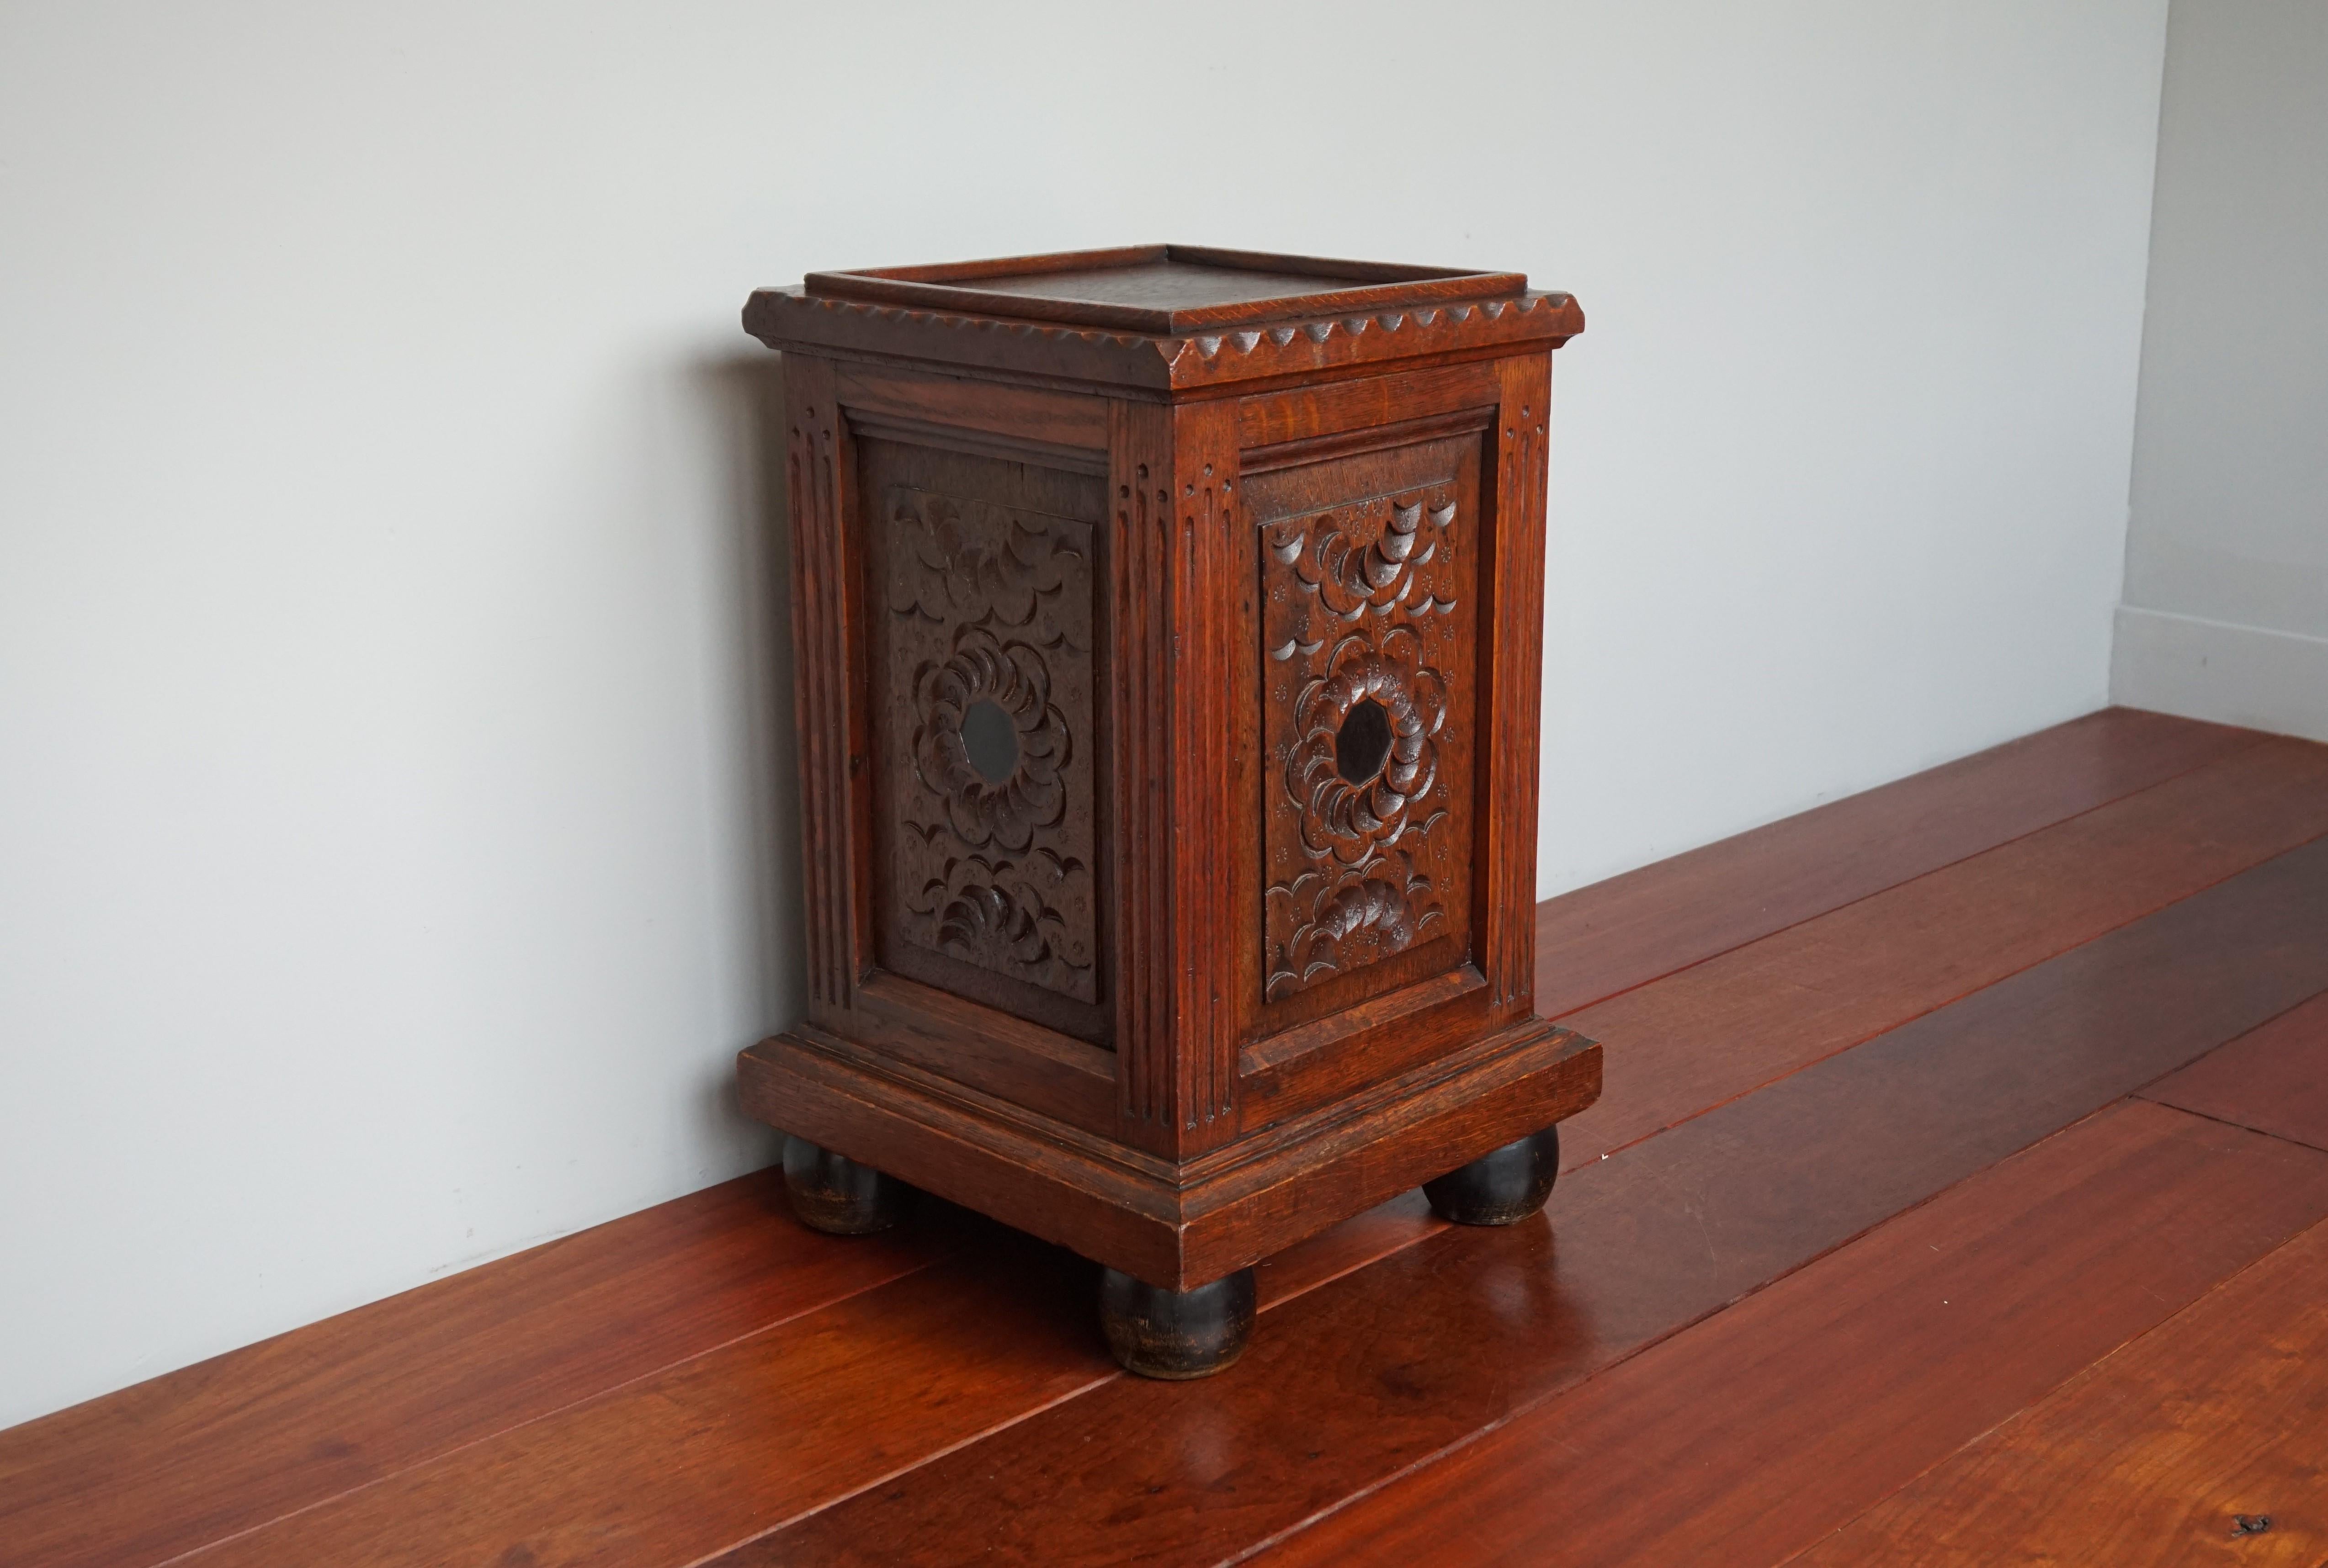 Stylish and highly practical plant, vase or sculpture stand from the early 1800s.

If you are looking for a handcrafted and truly decorative antique to grace your living space then this Dutch Renaissance Revival stand could be perfect. This fine